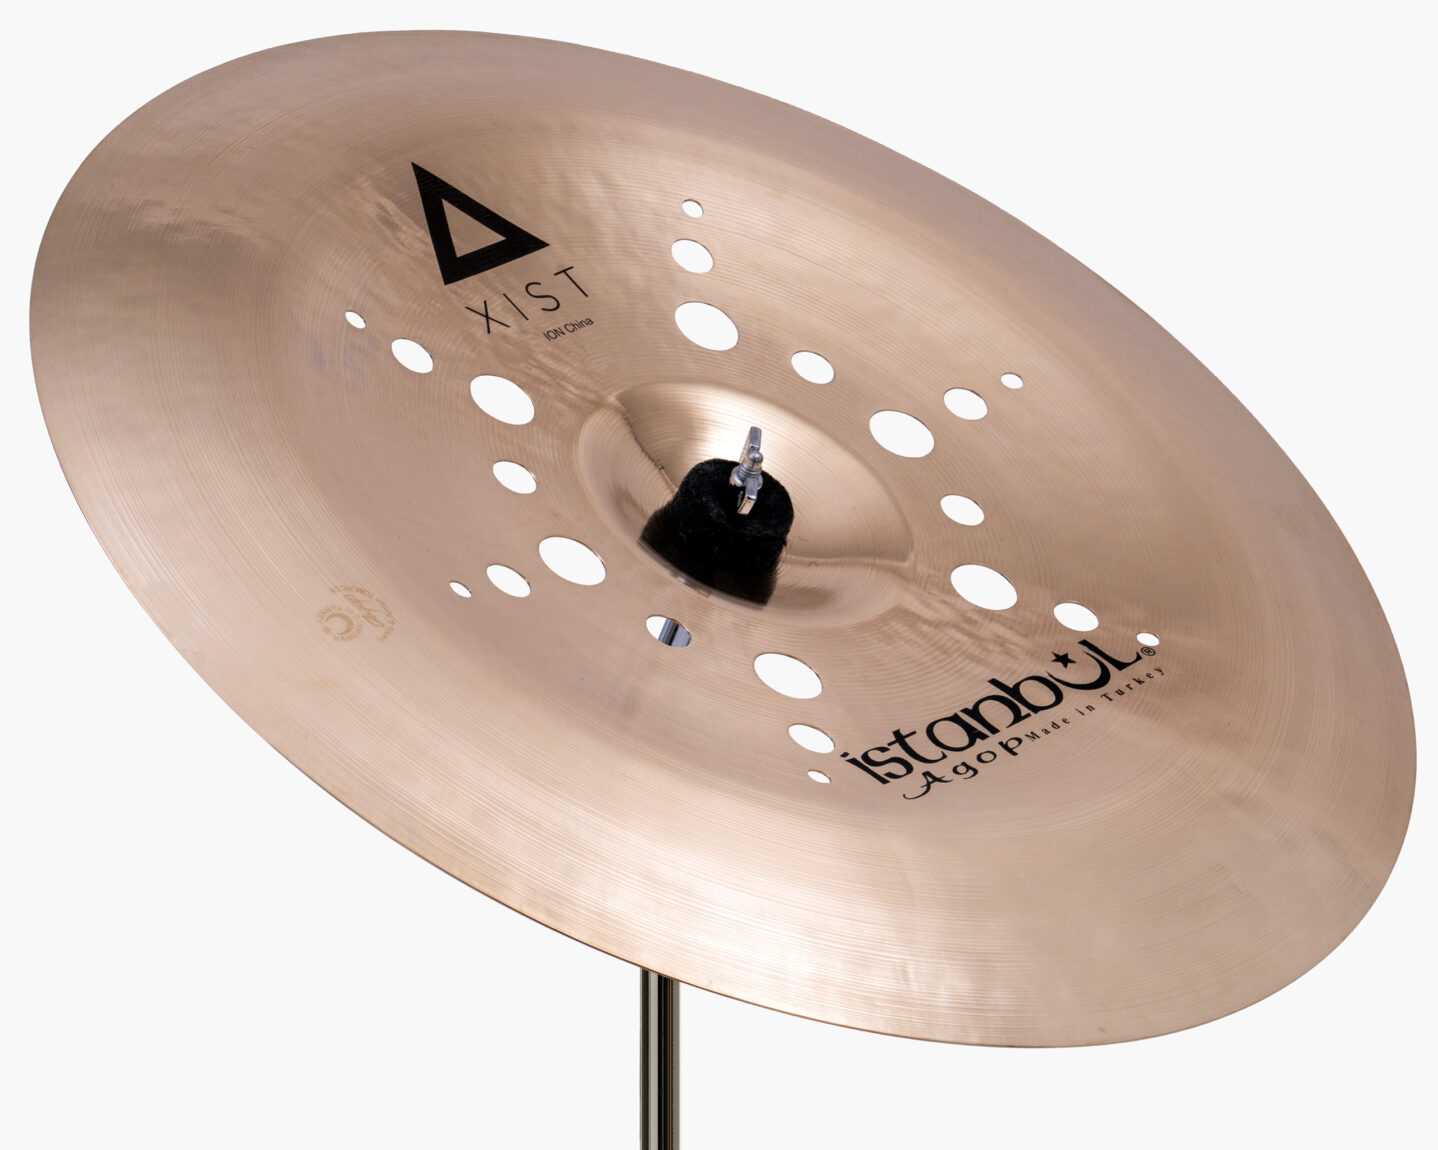 Istanbul Agop XIST Ion China